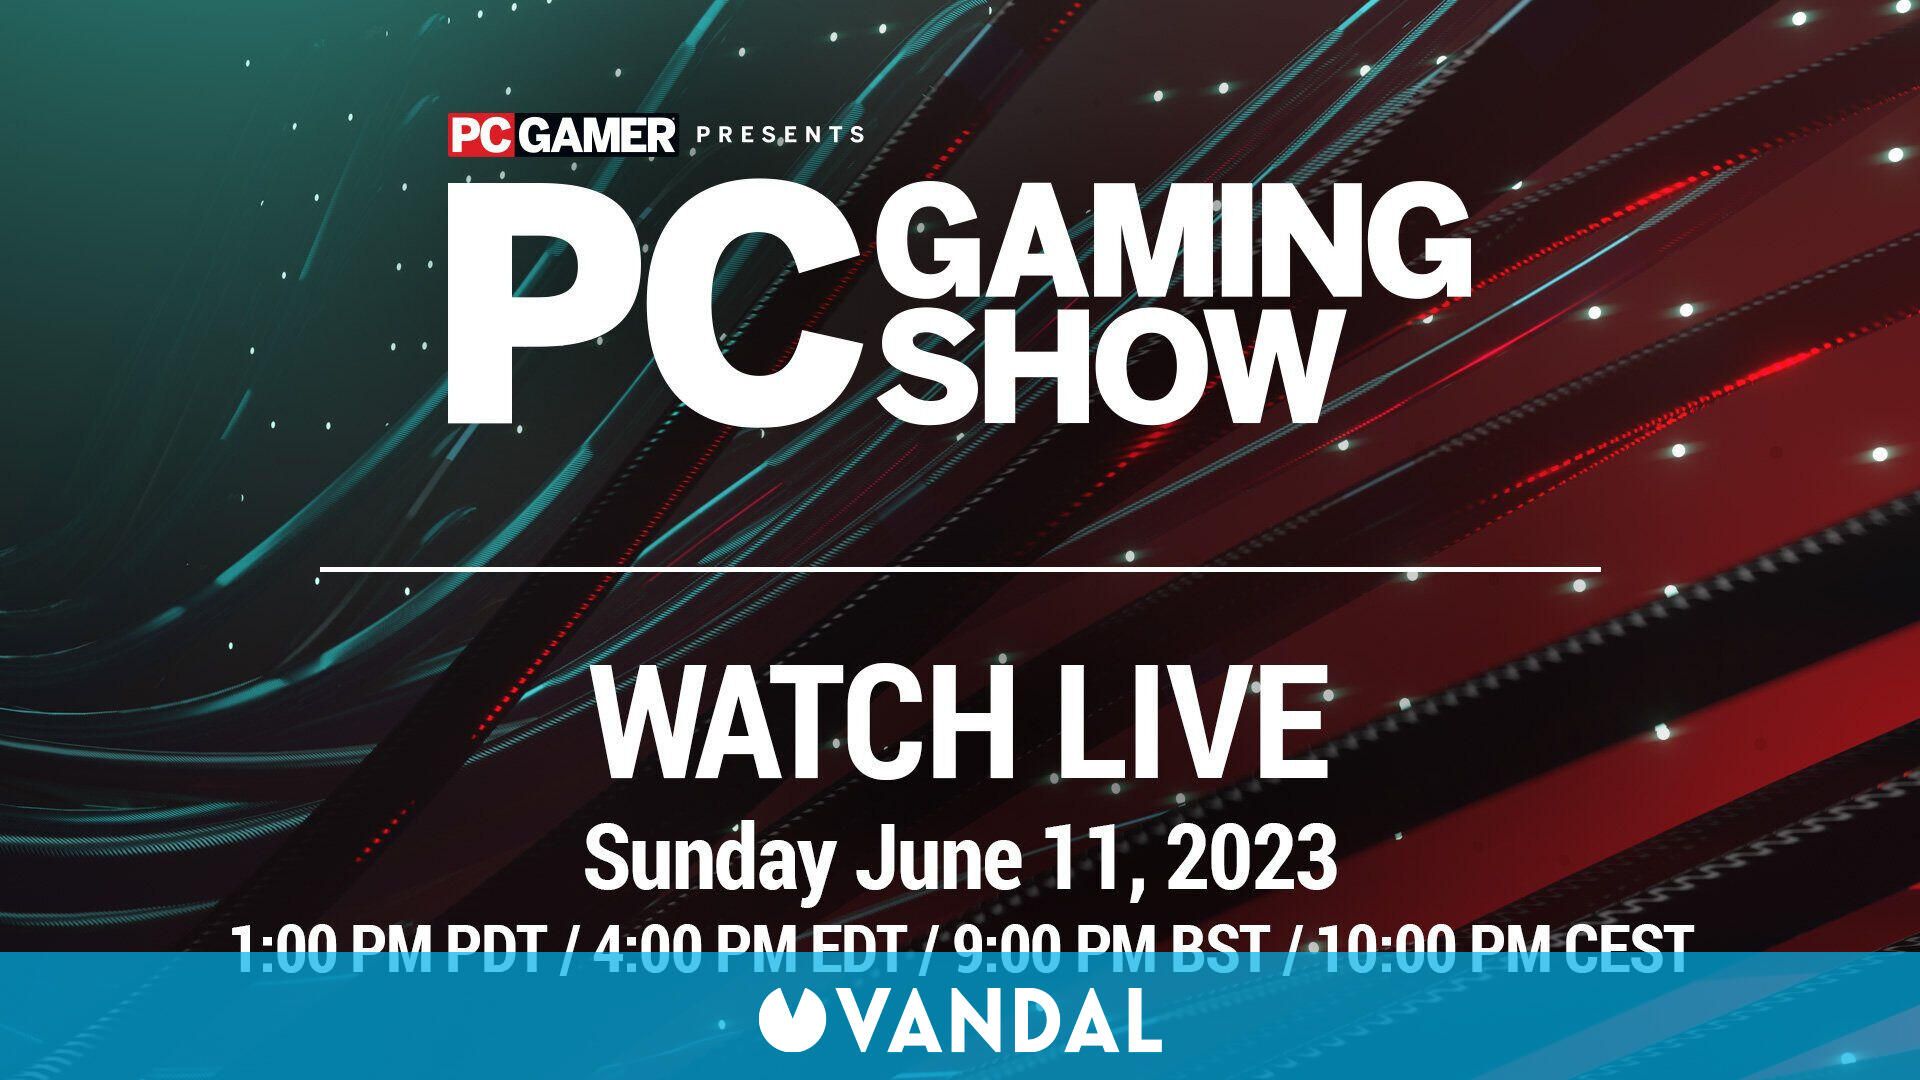 PC Game Show 2023 will feature 55 games, including more than 15 announcements